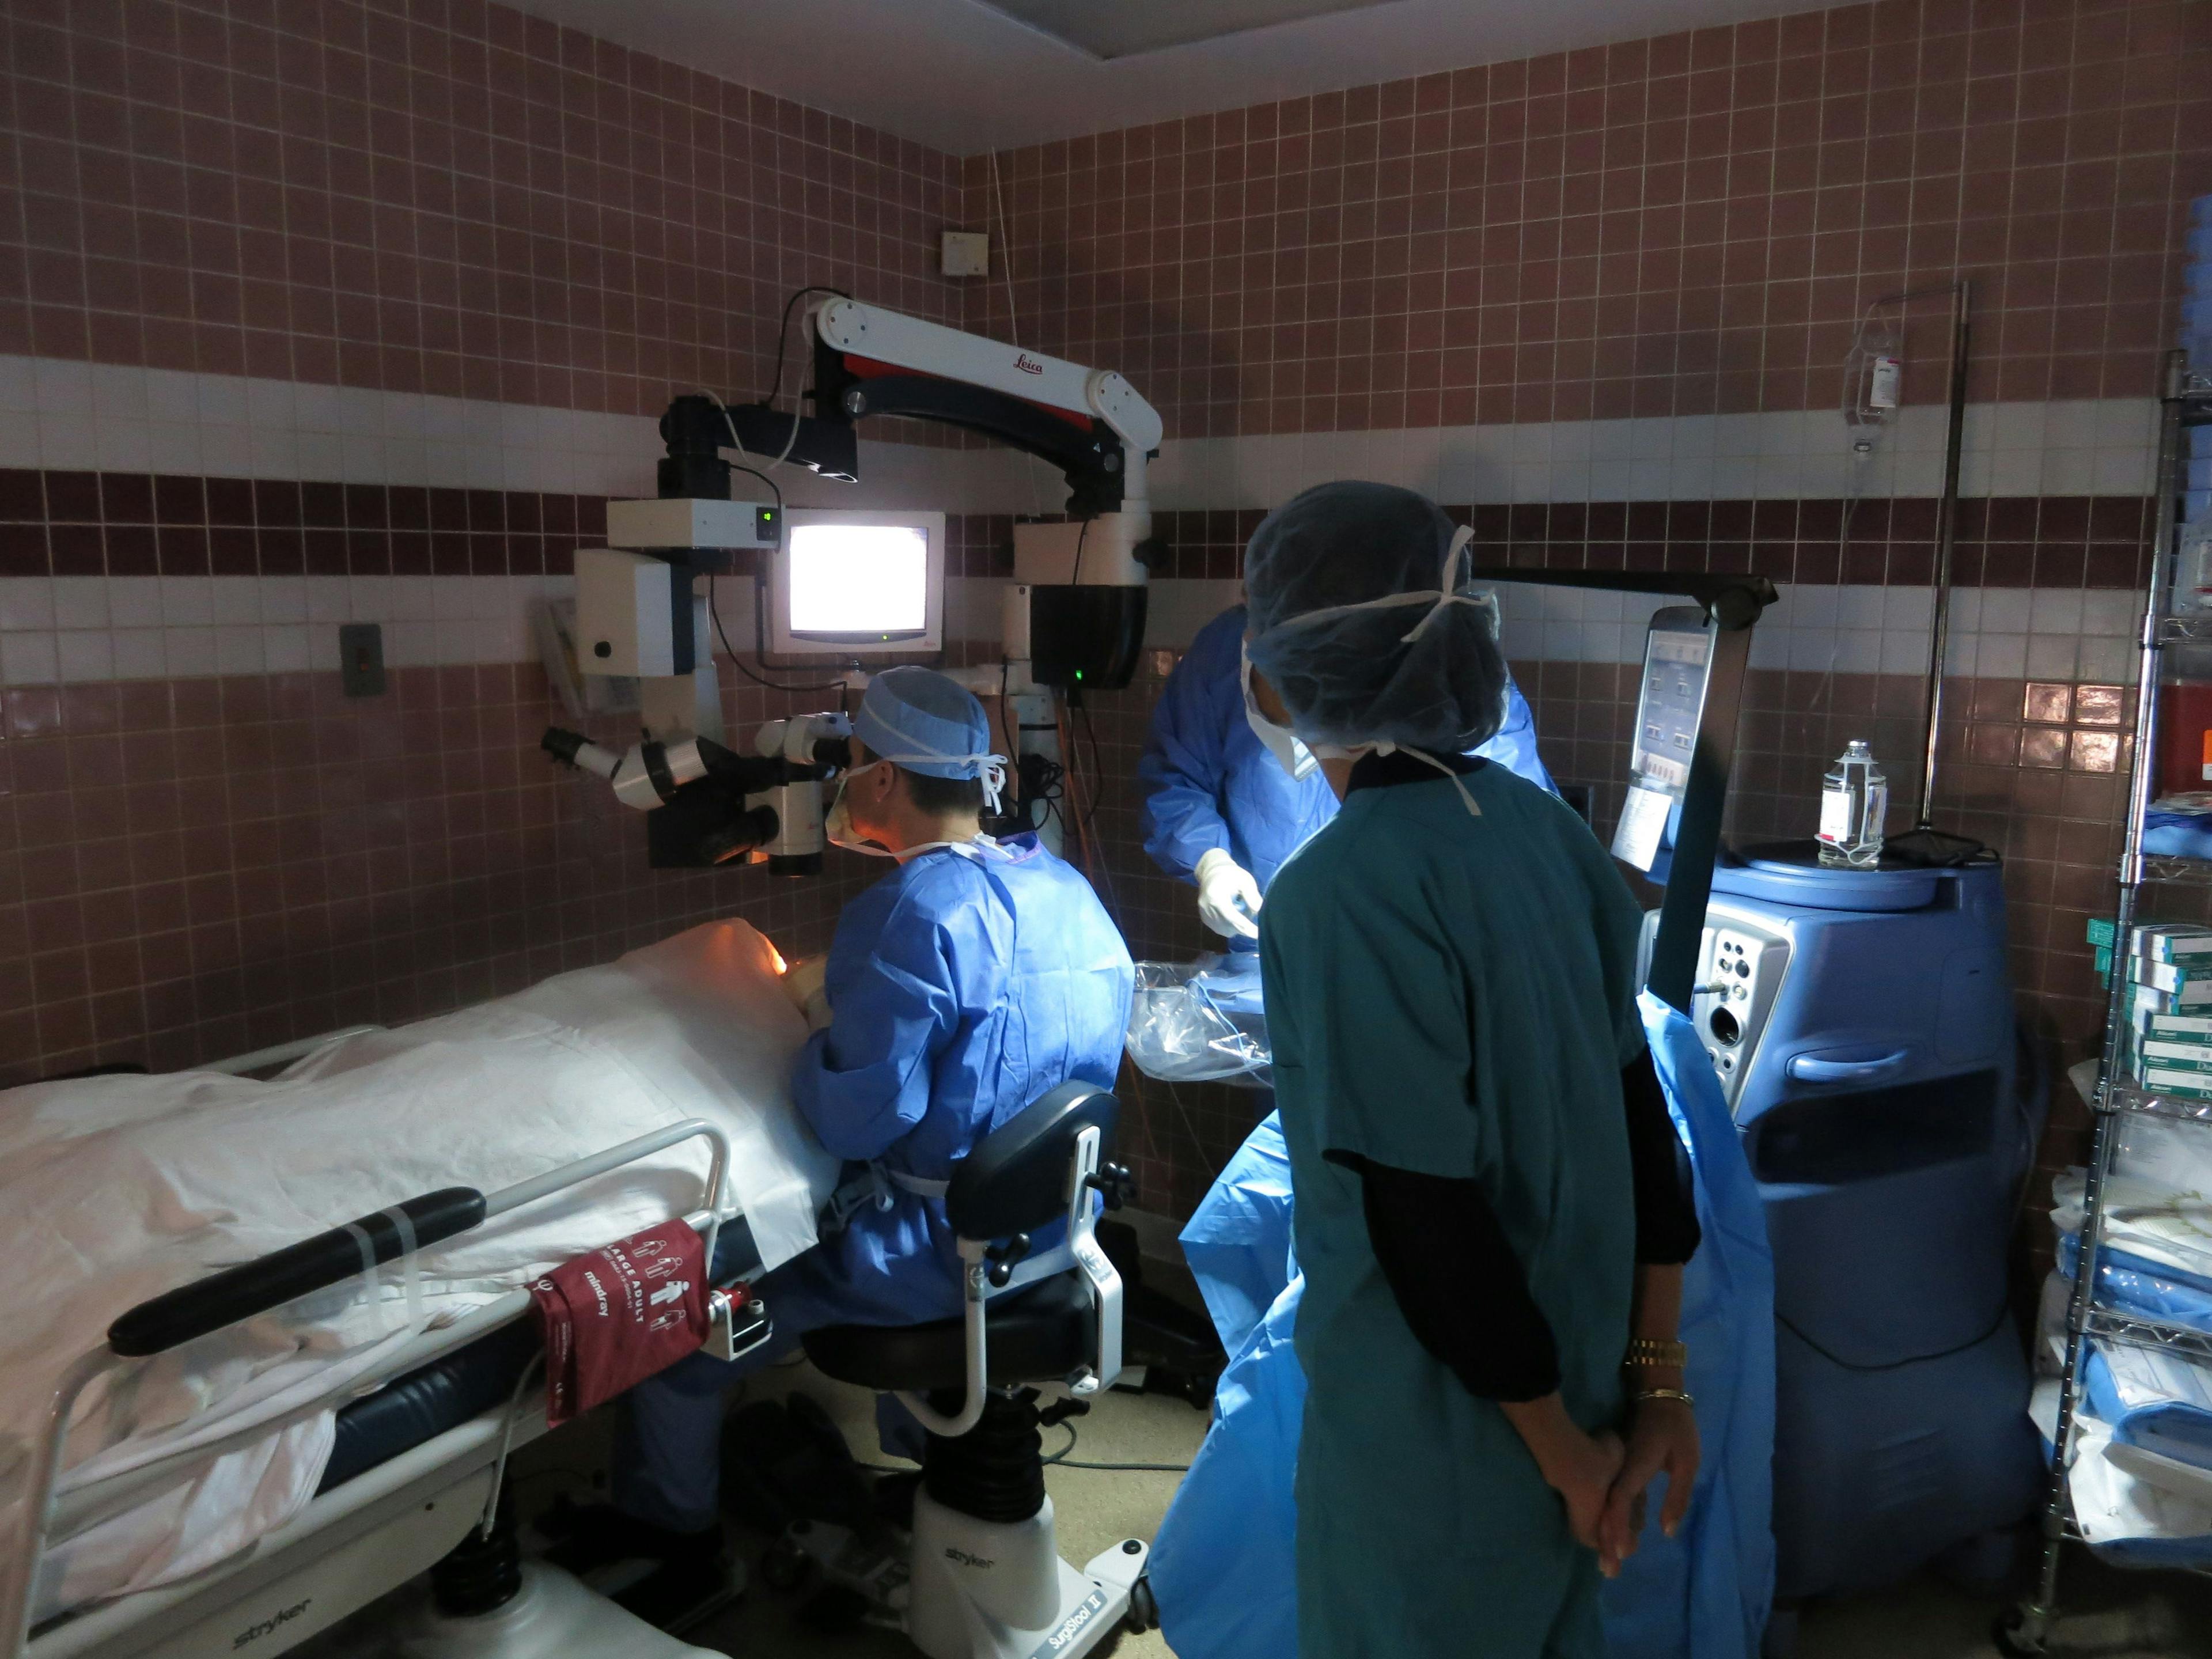 Figure 4. Student observing in the cataract surgery suite at an off-site ambulatory surgical center (ASC). 